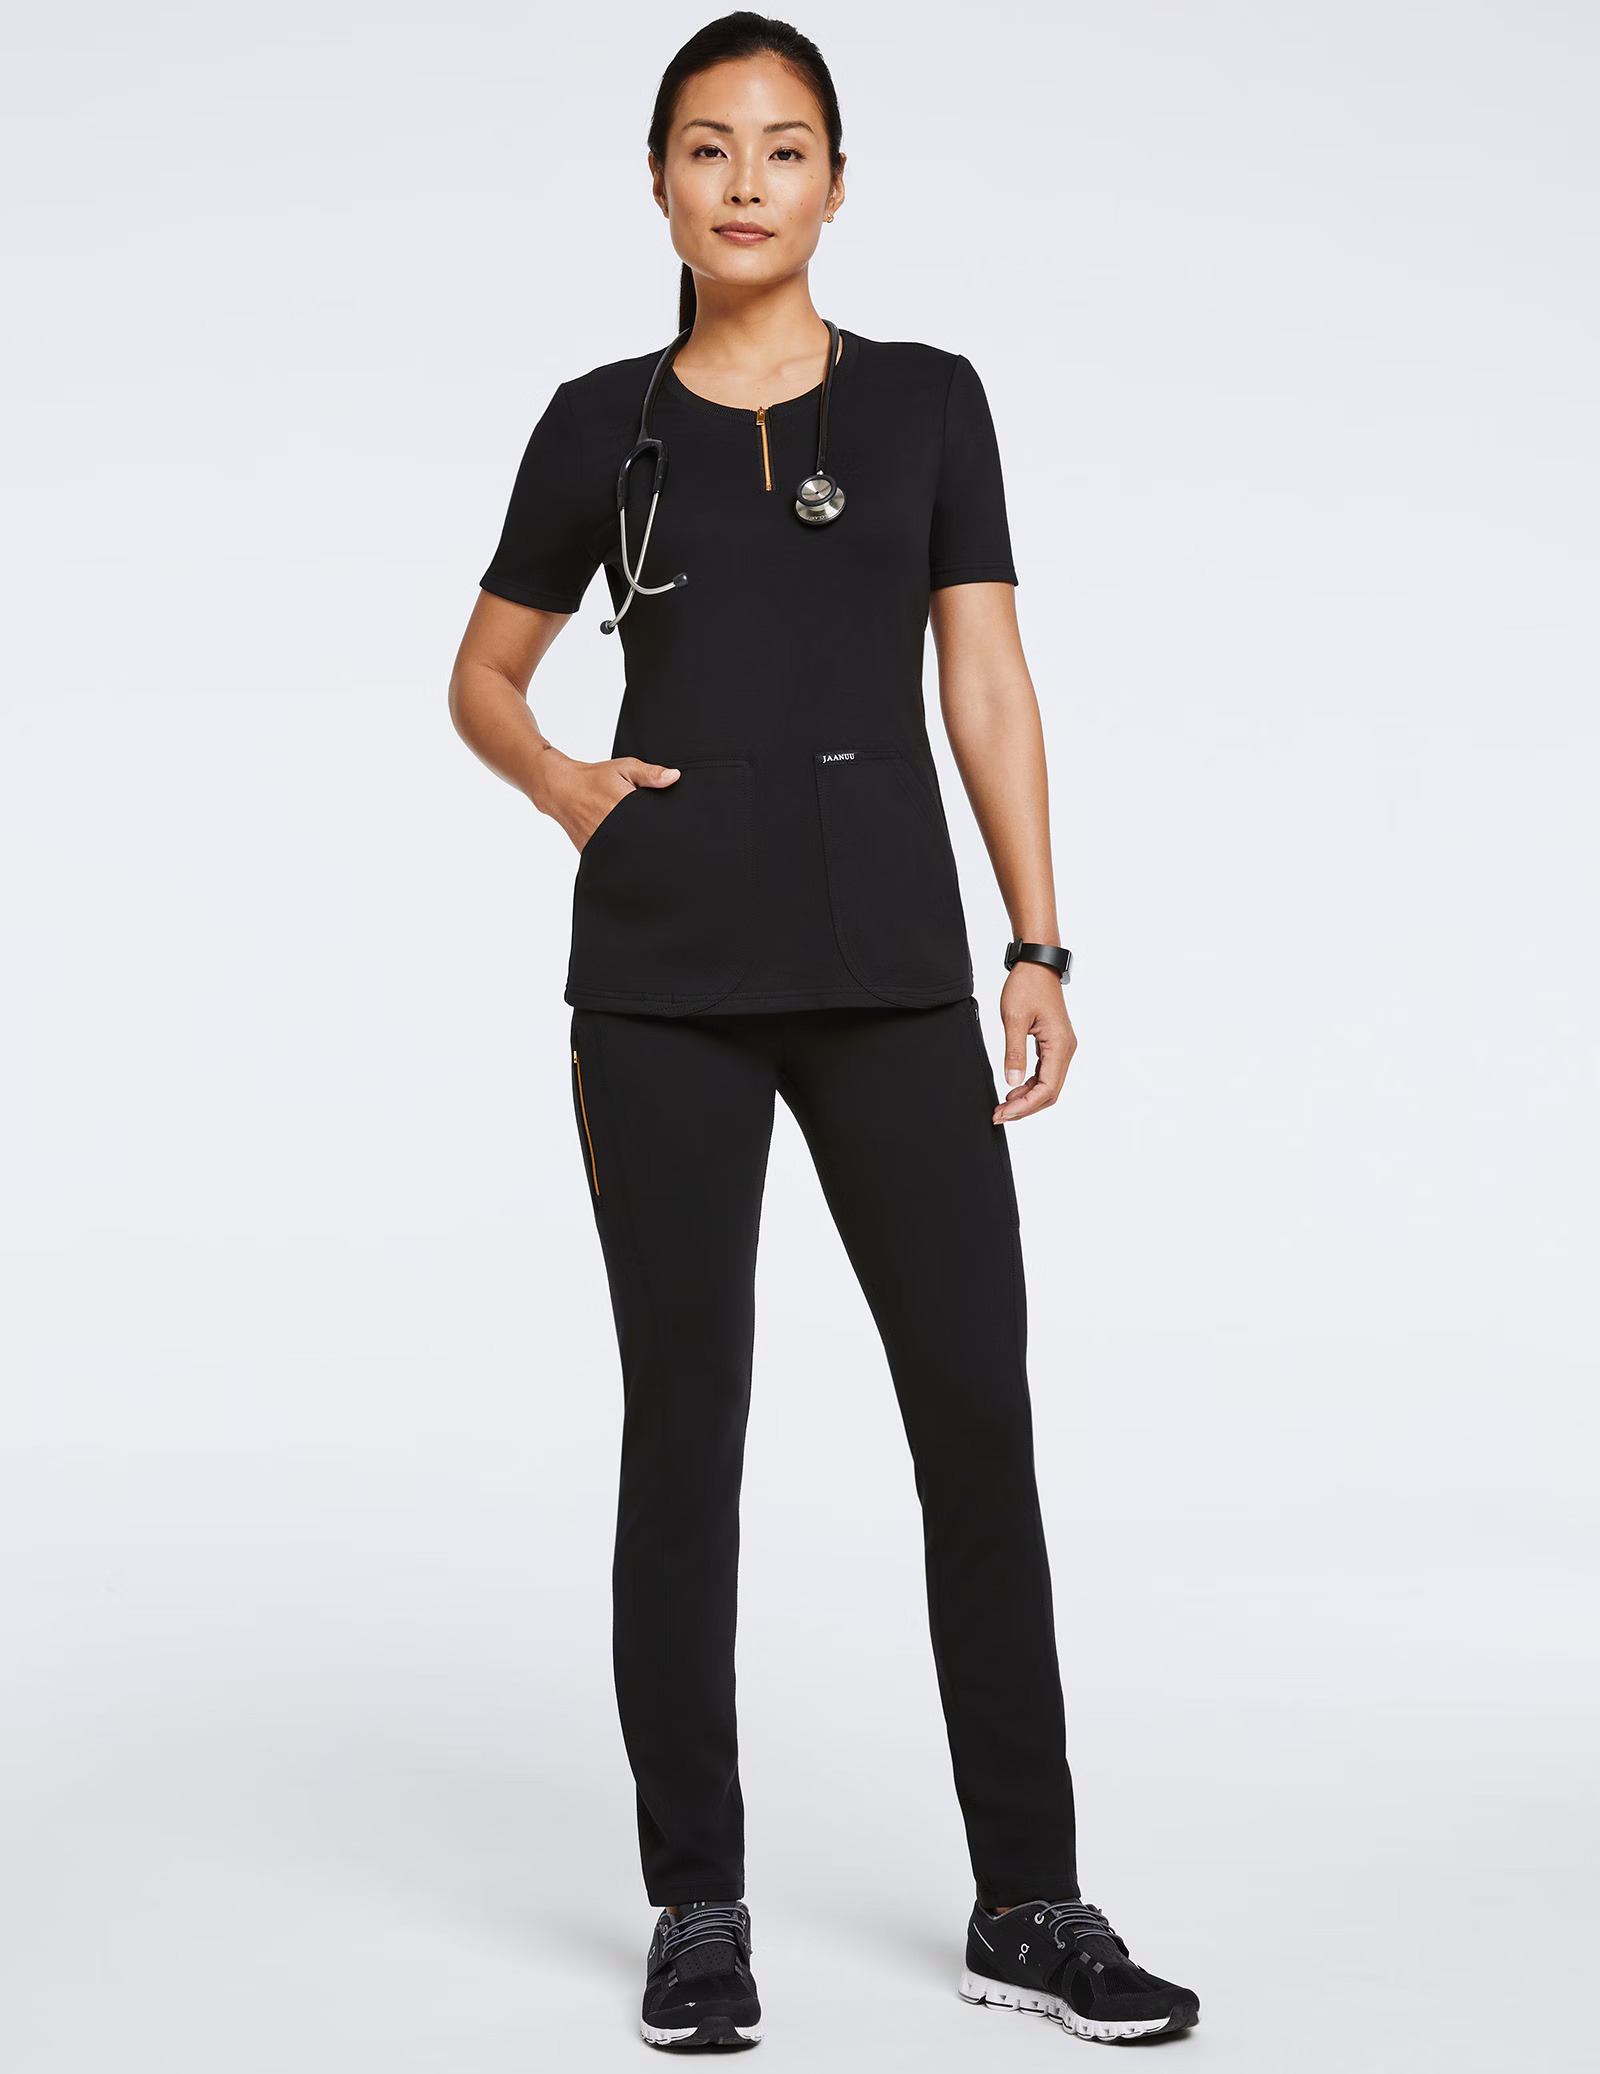 Cute Plus Size Scrubs Are Hard To Find, But Jaanuu's Curve Line